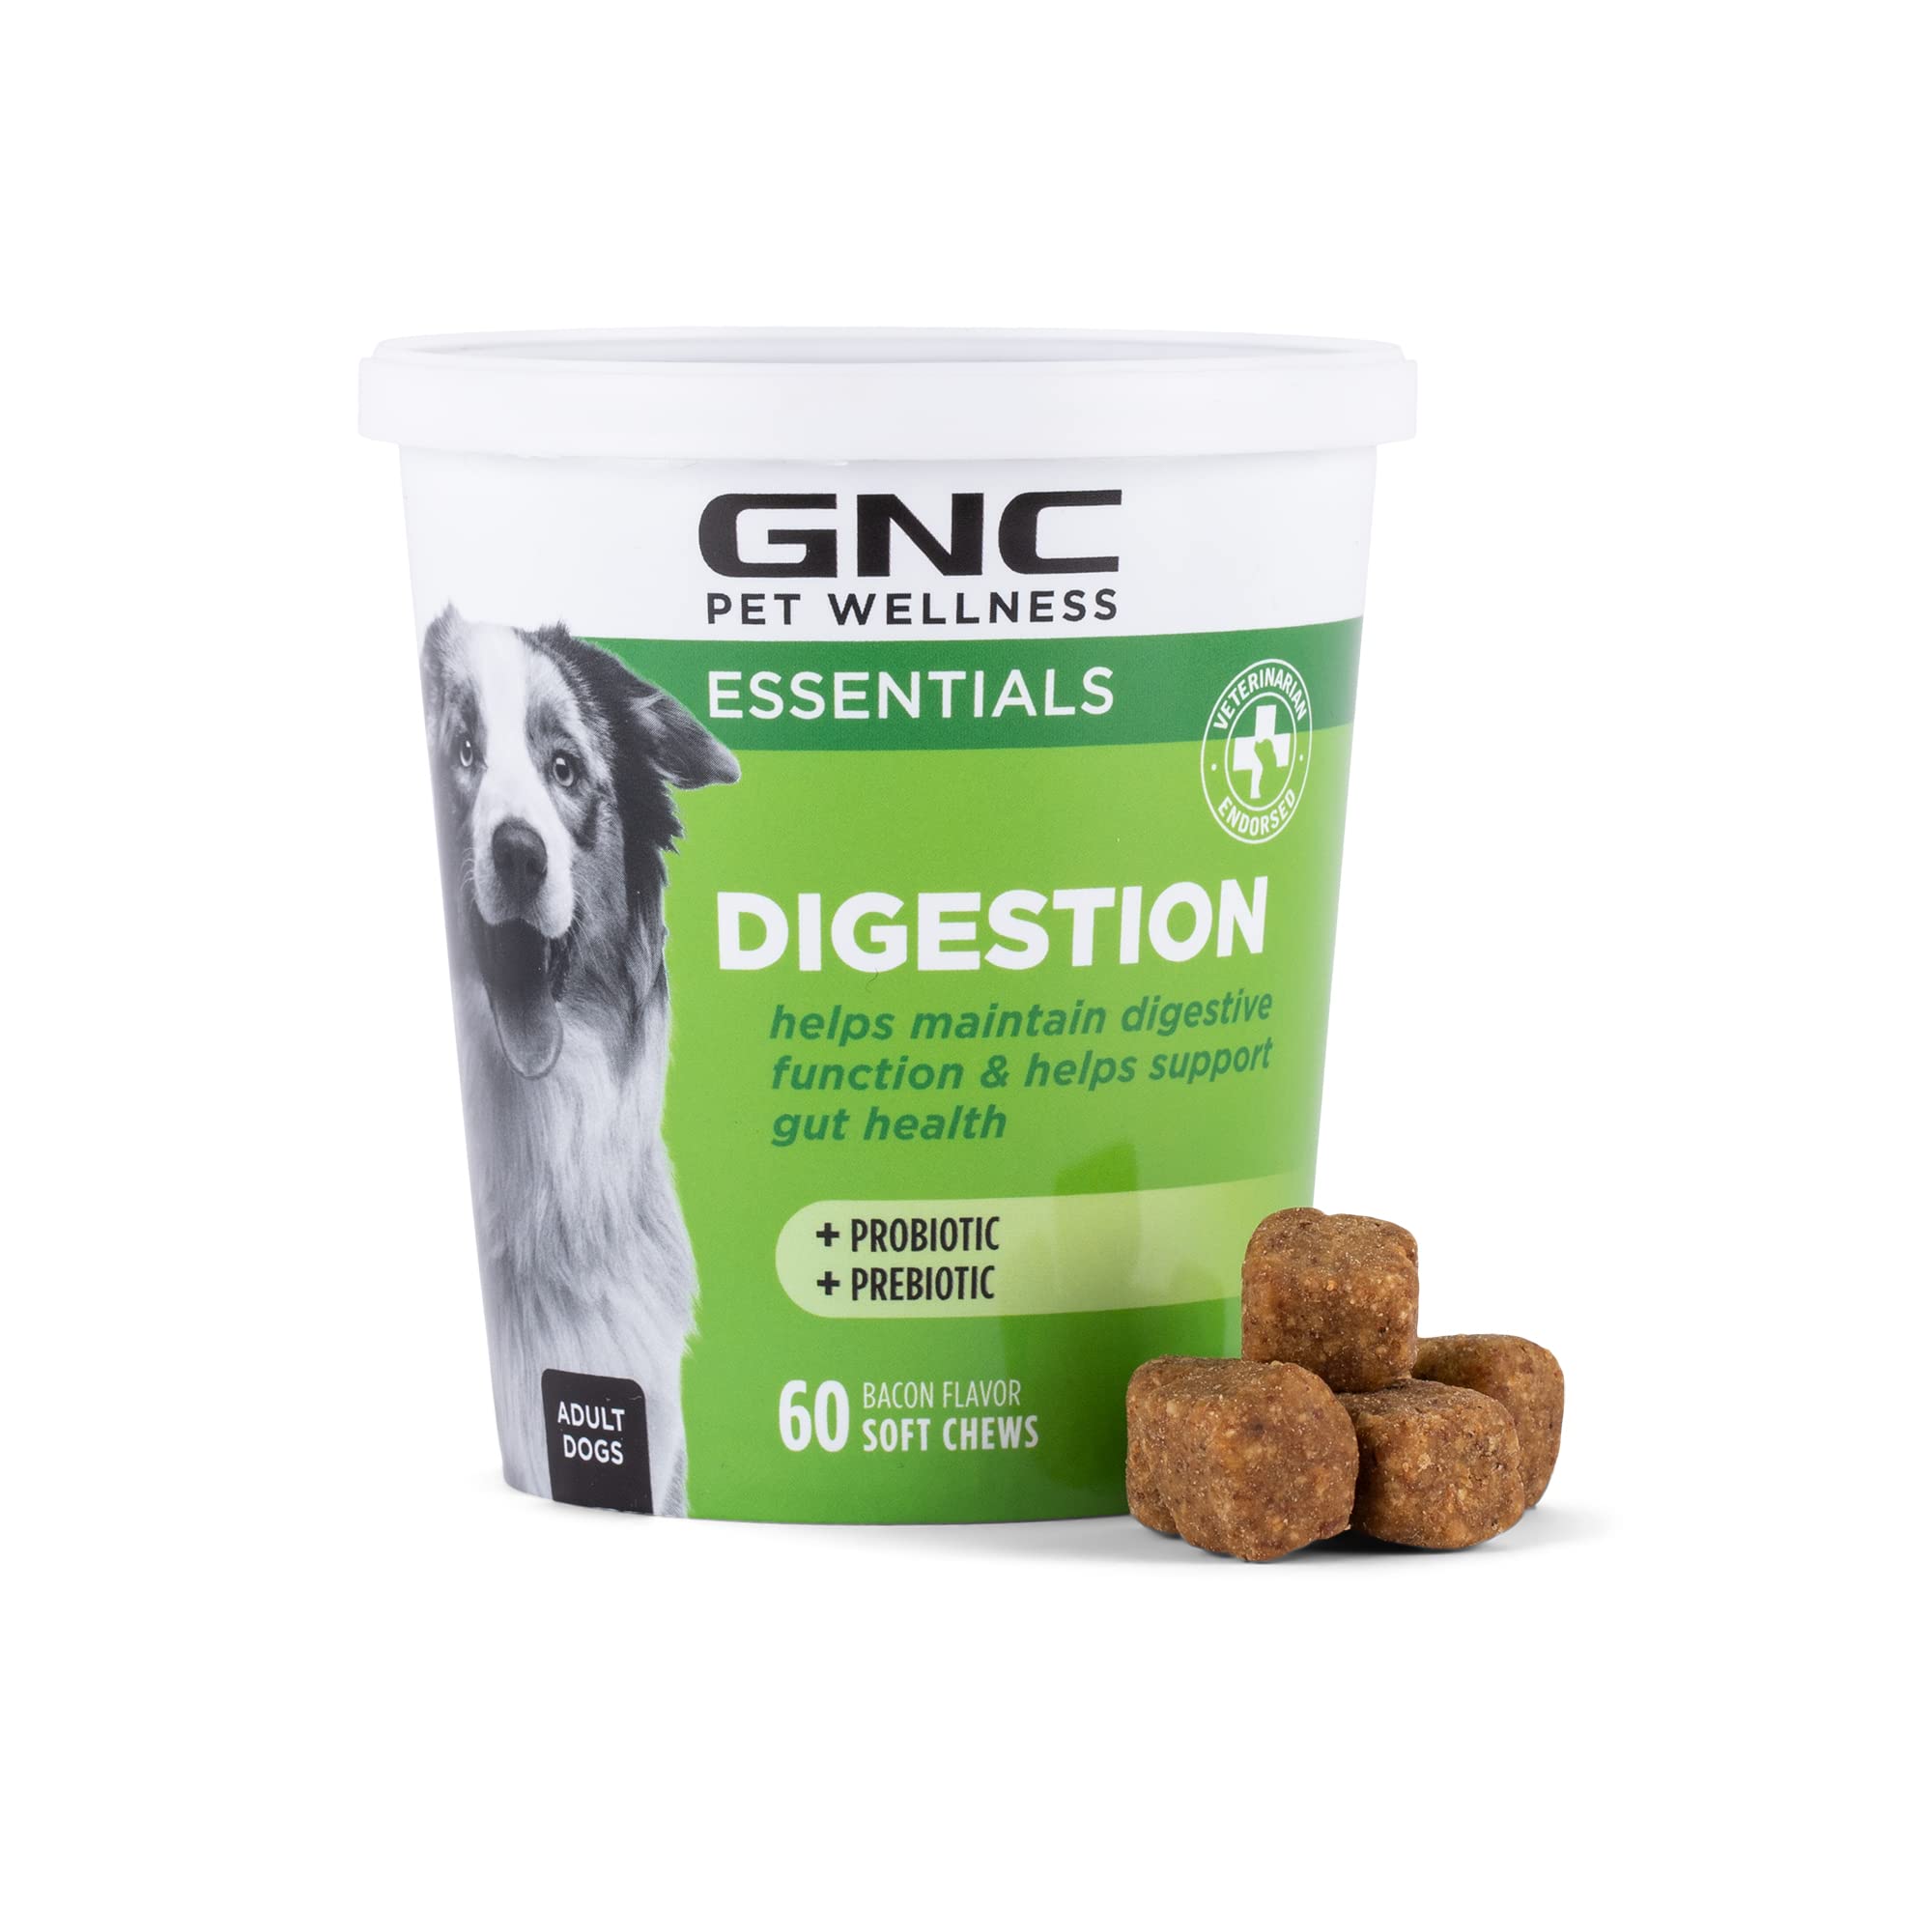 Gnc Pets Essentials Digestion Supplements For All Dogs 60Ct 22G Soft Chews Bacon Flavor 12Oz Reusable Container Daily Supplement